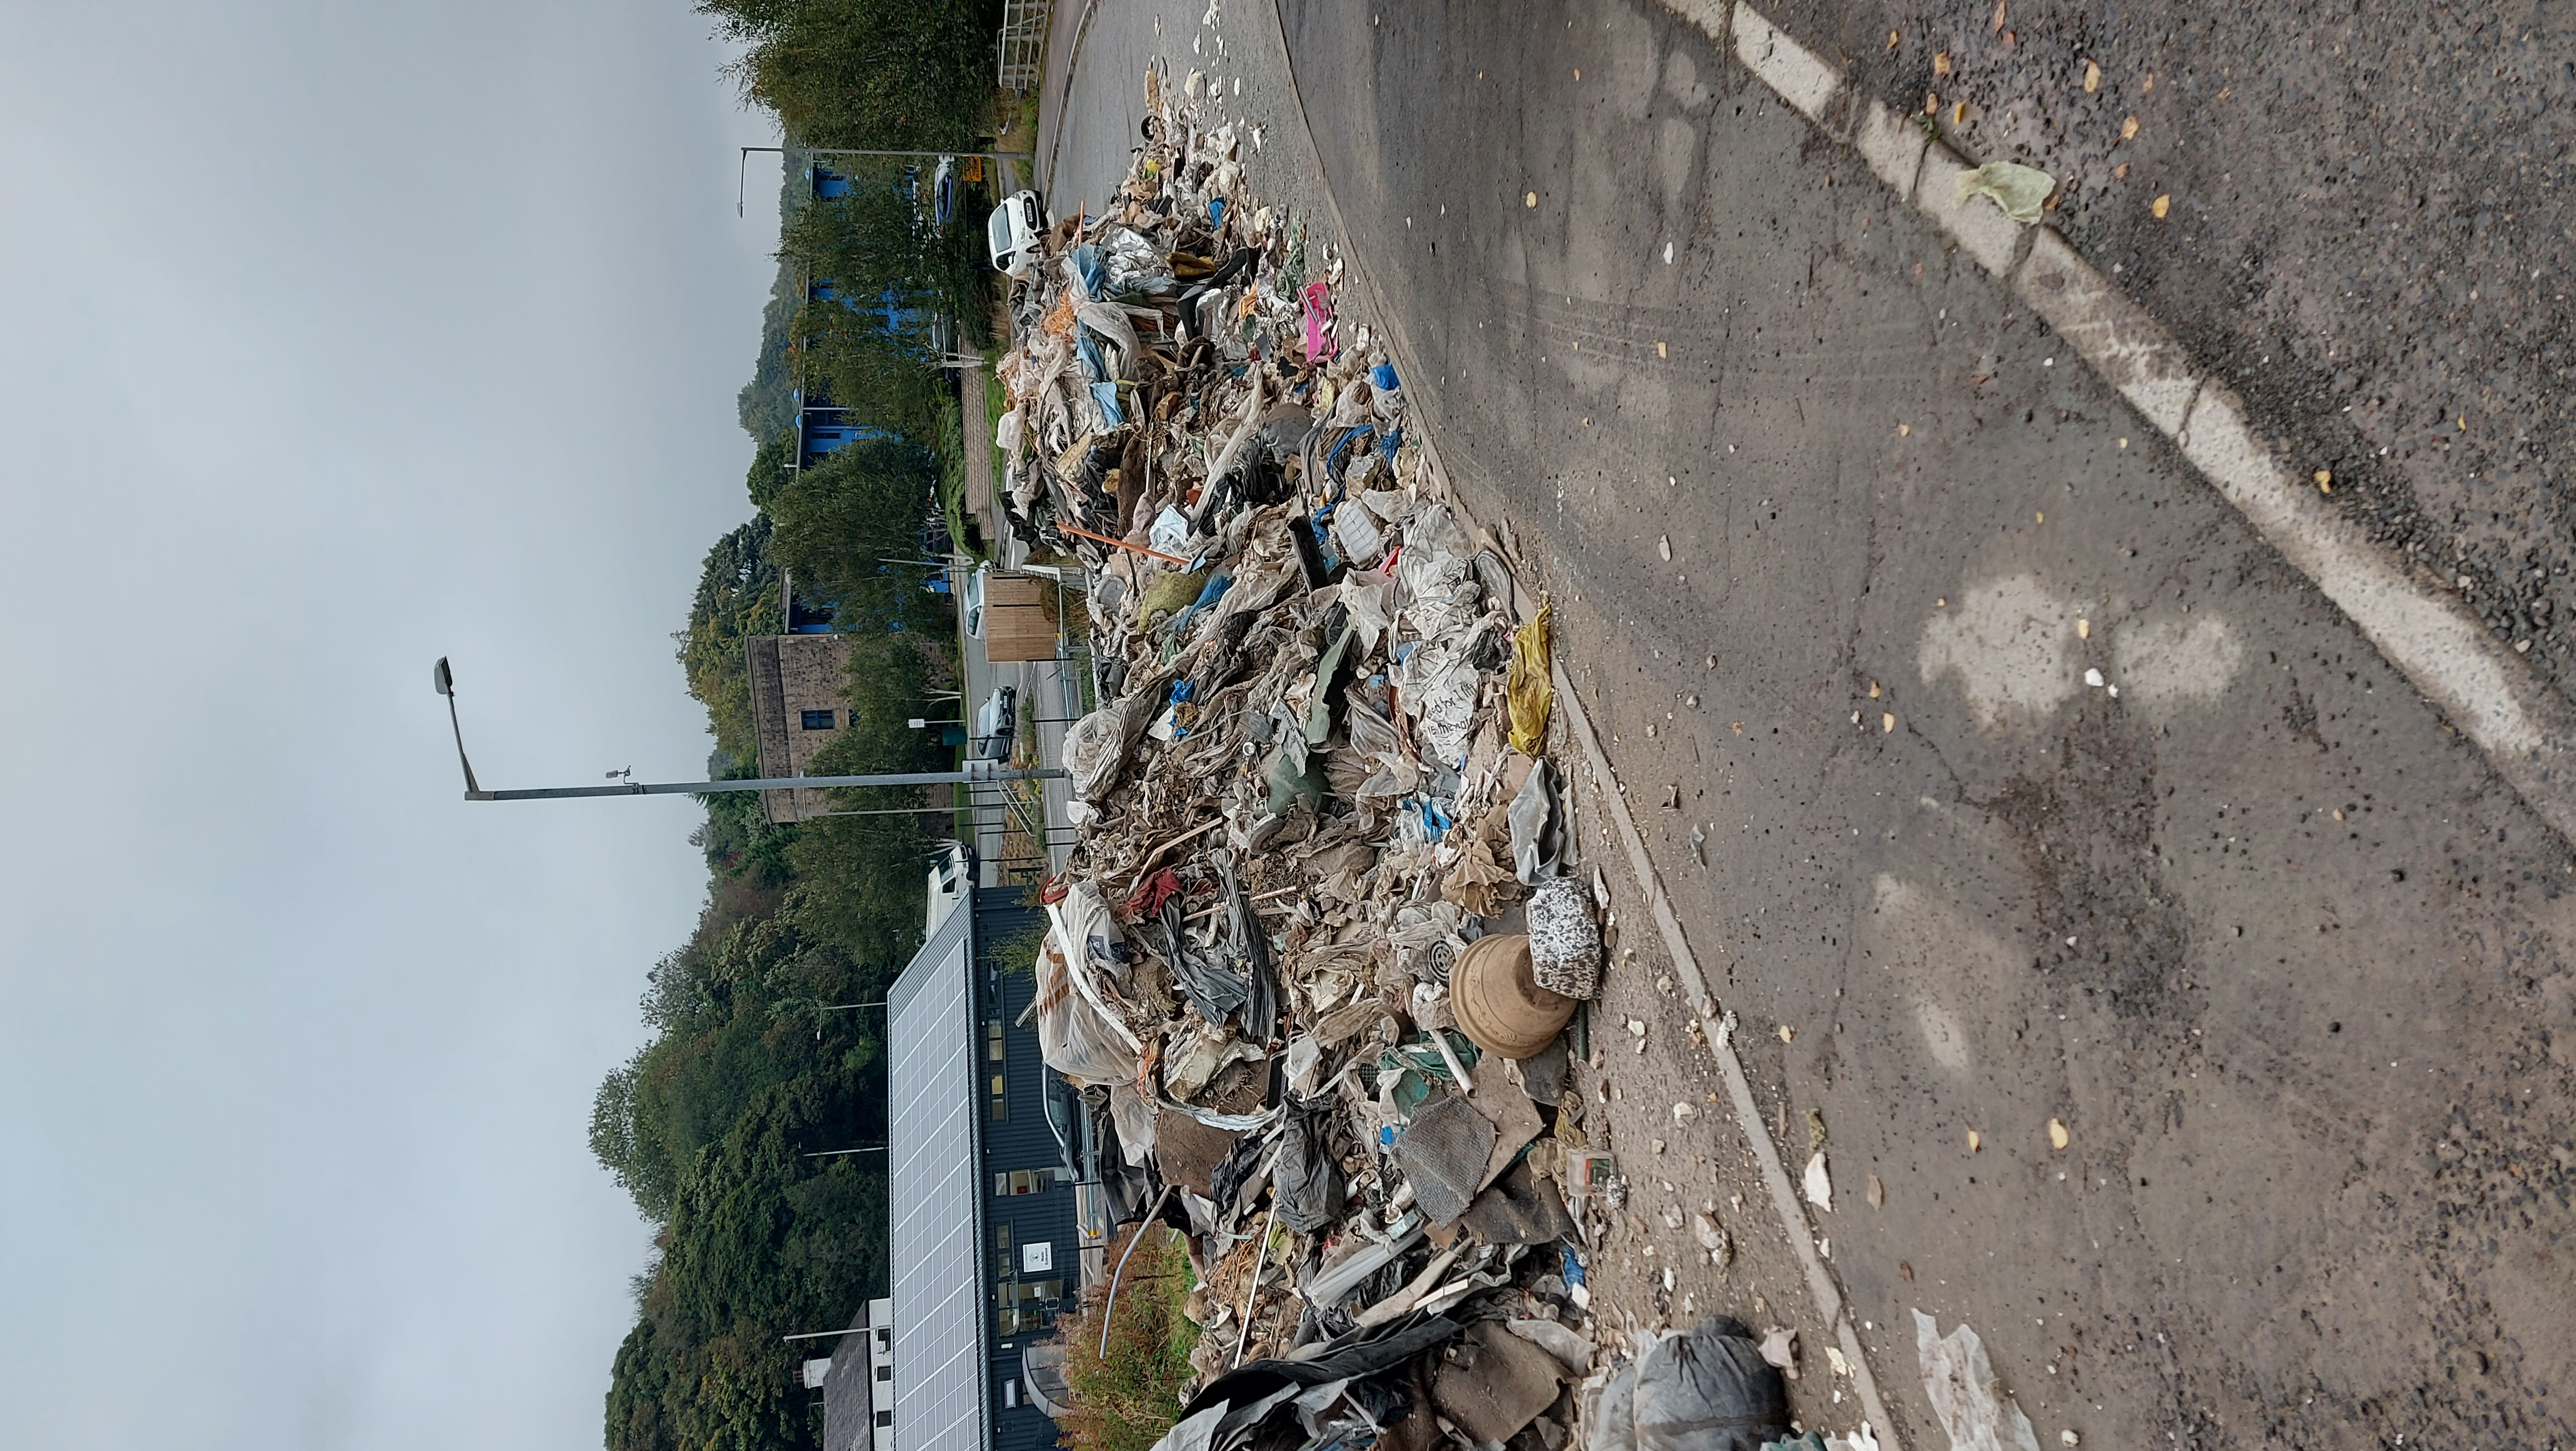 huge amount of fly tipped waste dumped